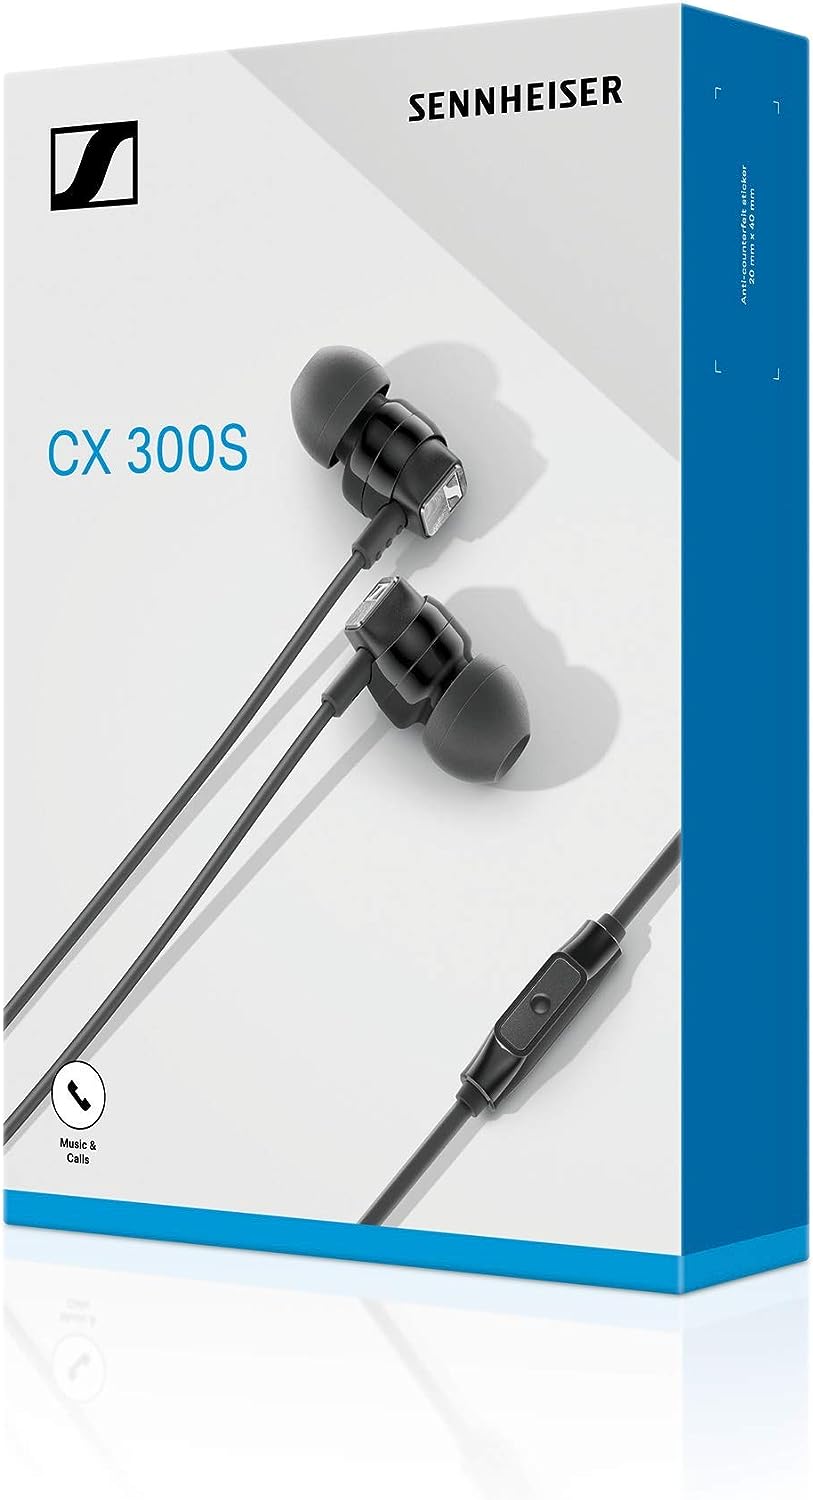 Sennheiser CX 300S In Ear Headphone with One-Button Smart Remote - Black